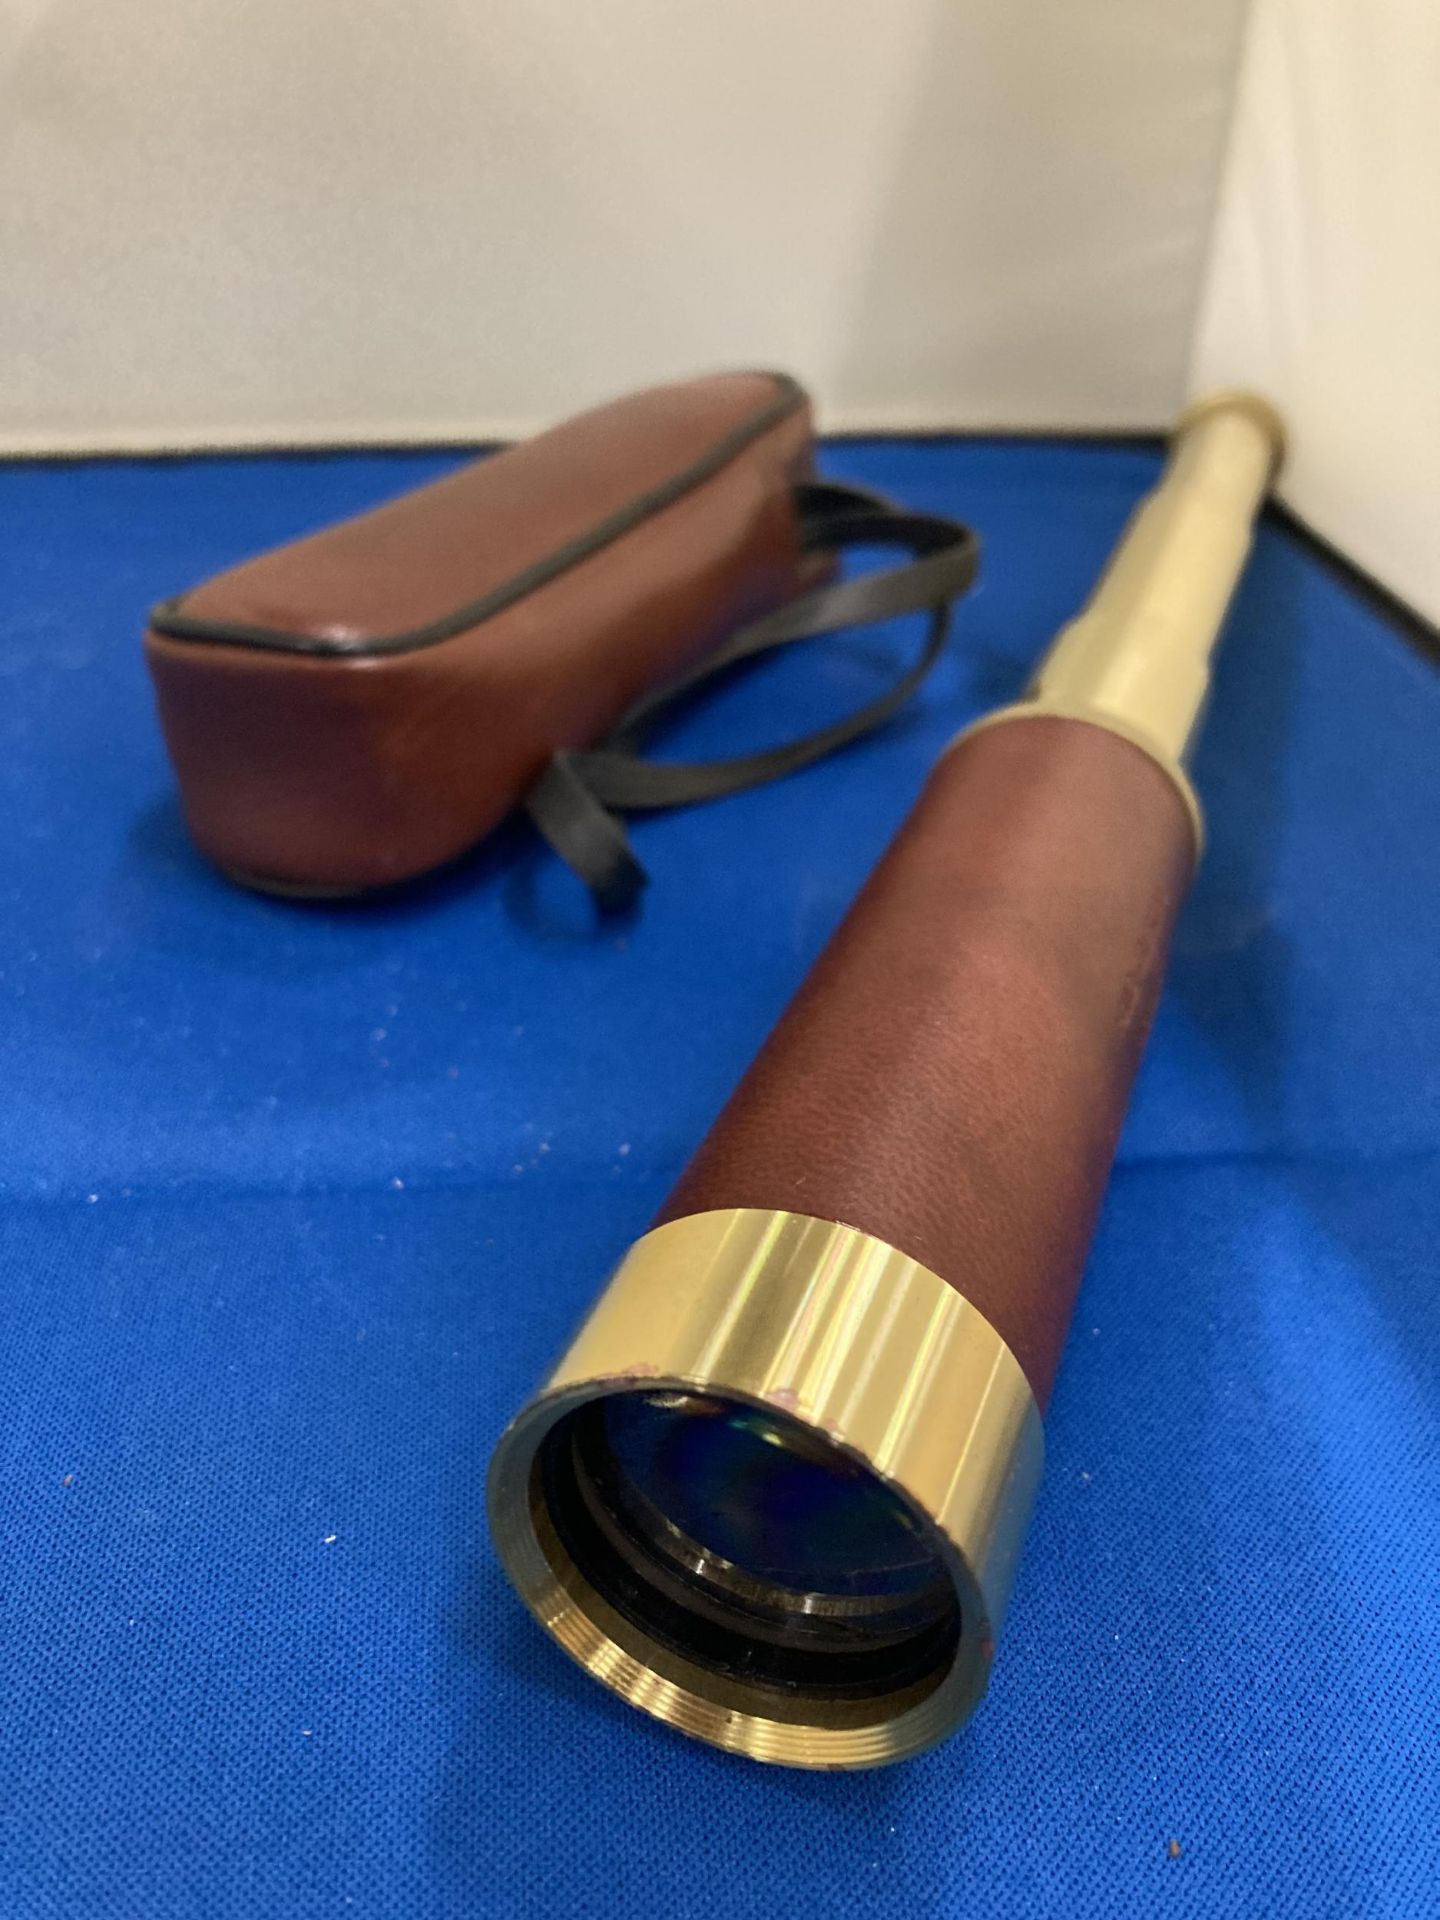 A VINTAGE STYLE TELESCOPE - A/F - Image 2 of 3